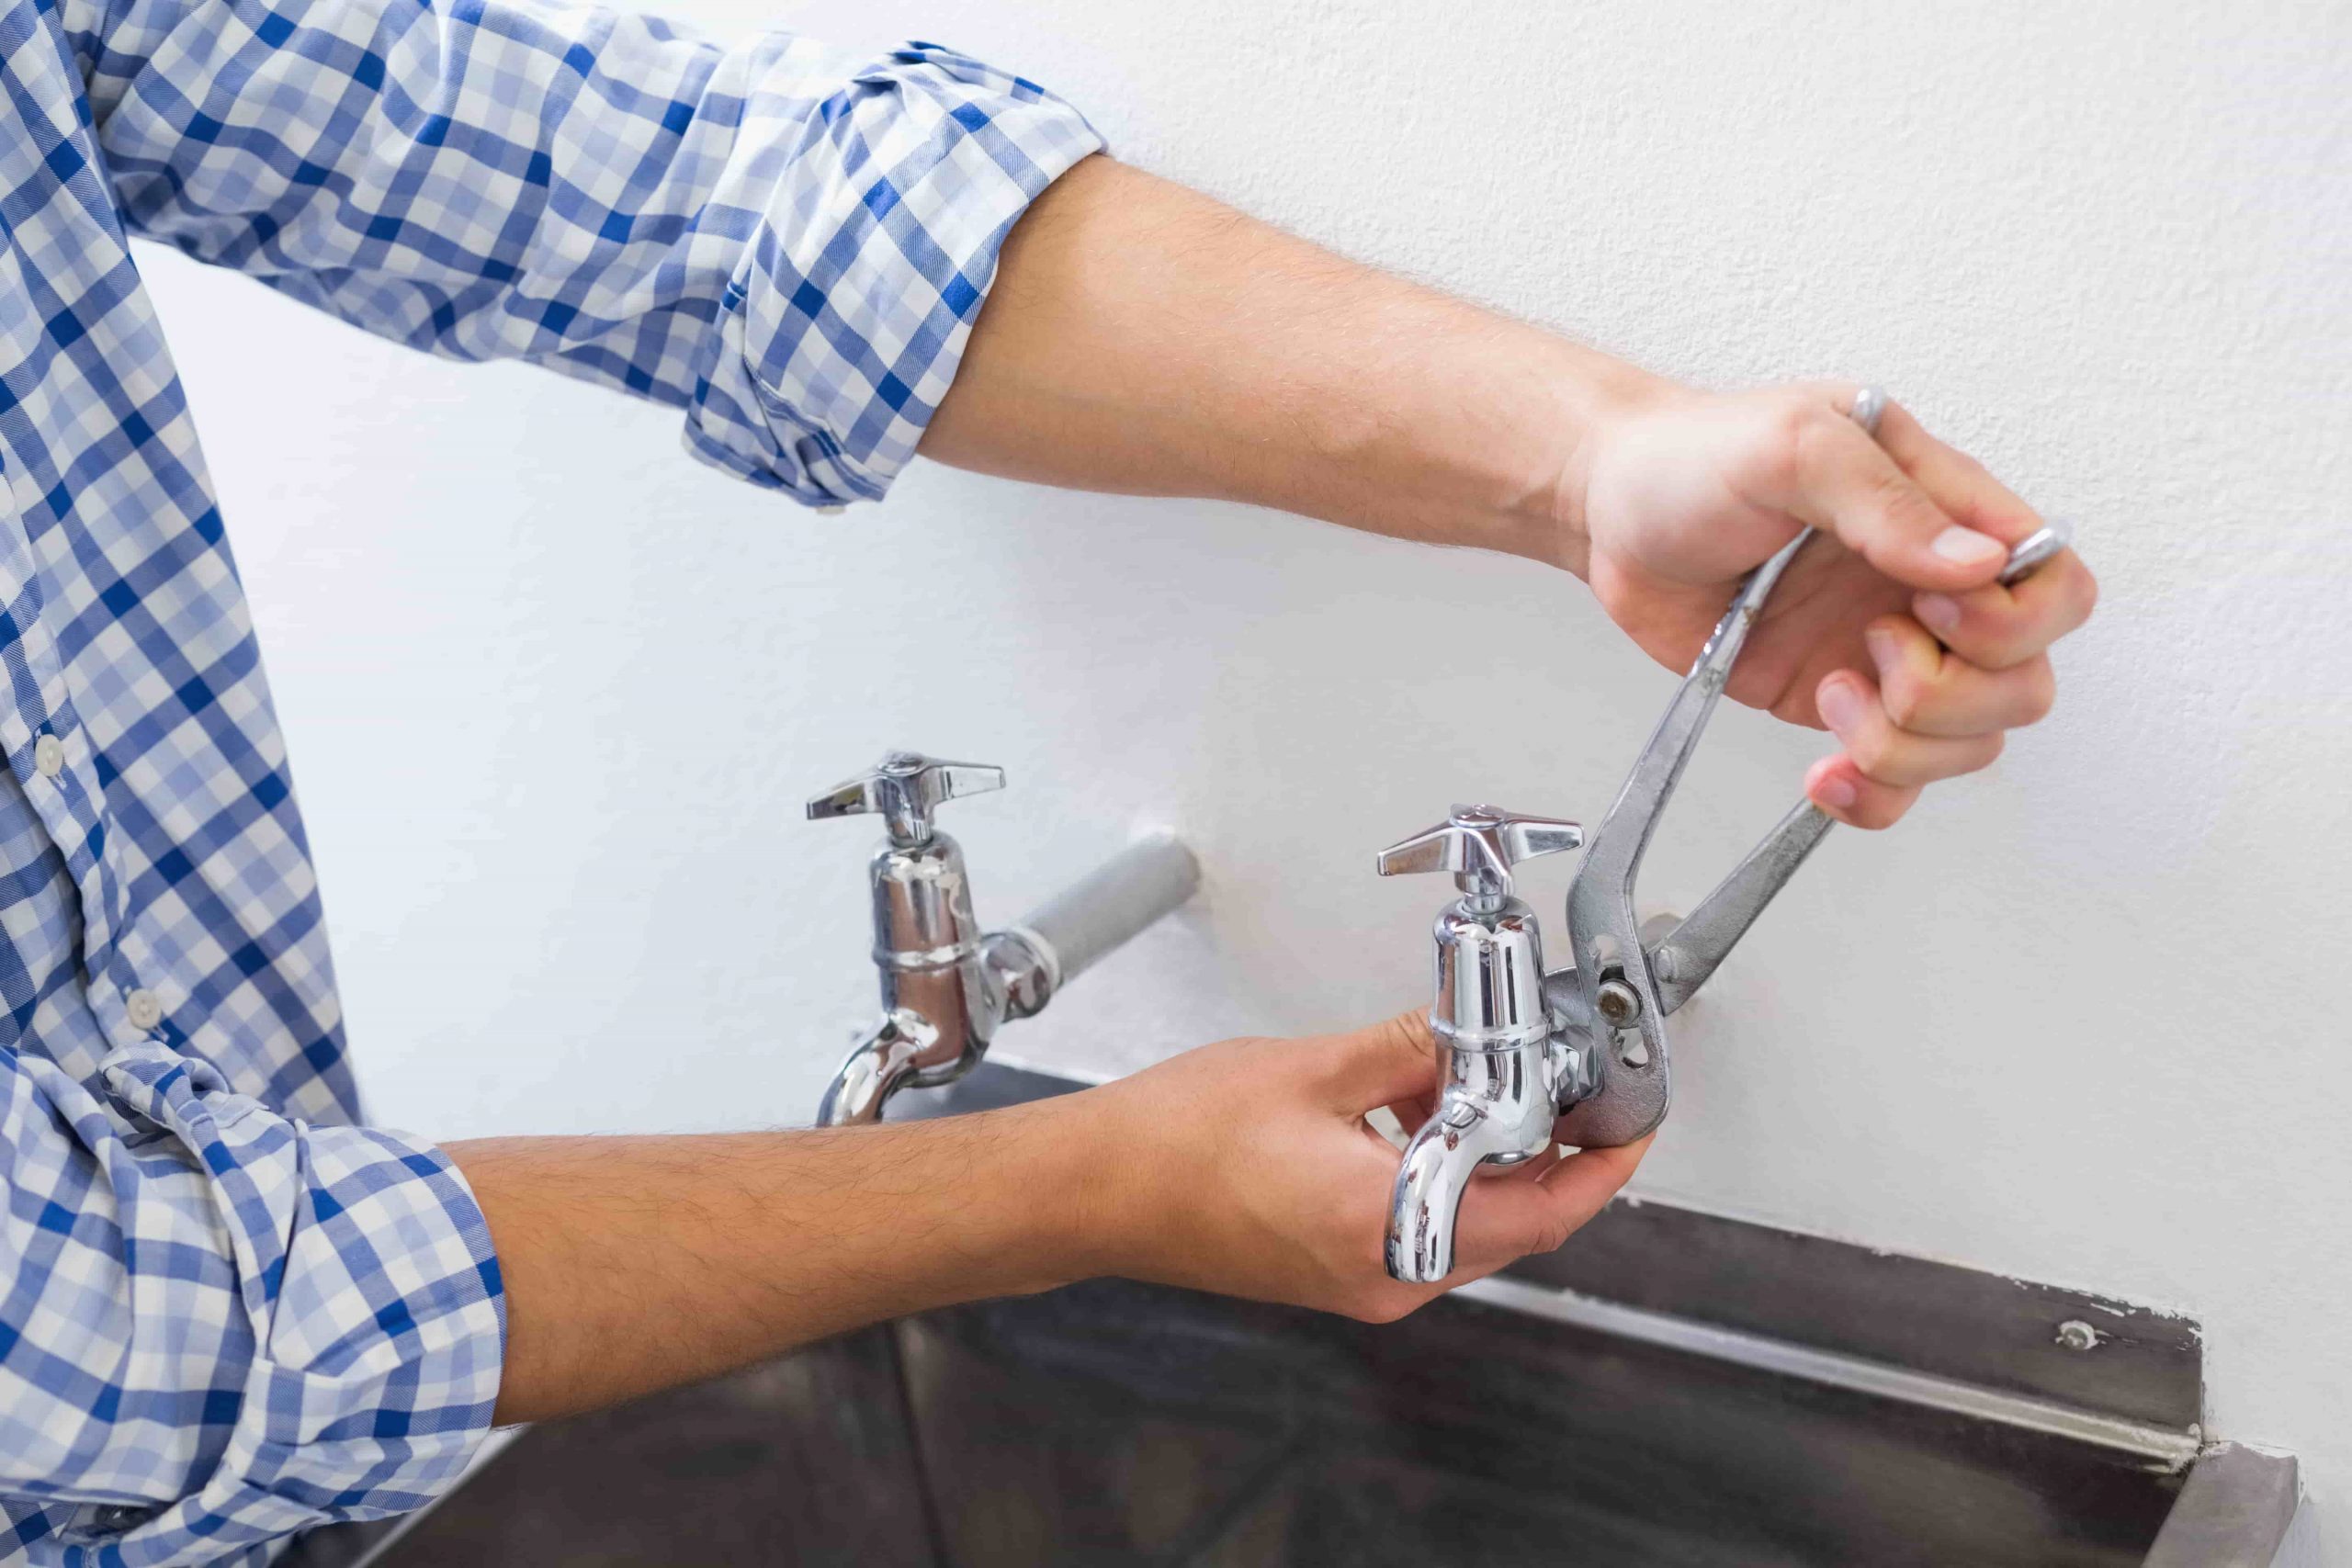 Step by step for installing a basin mixer